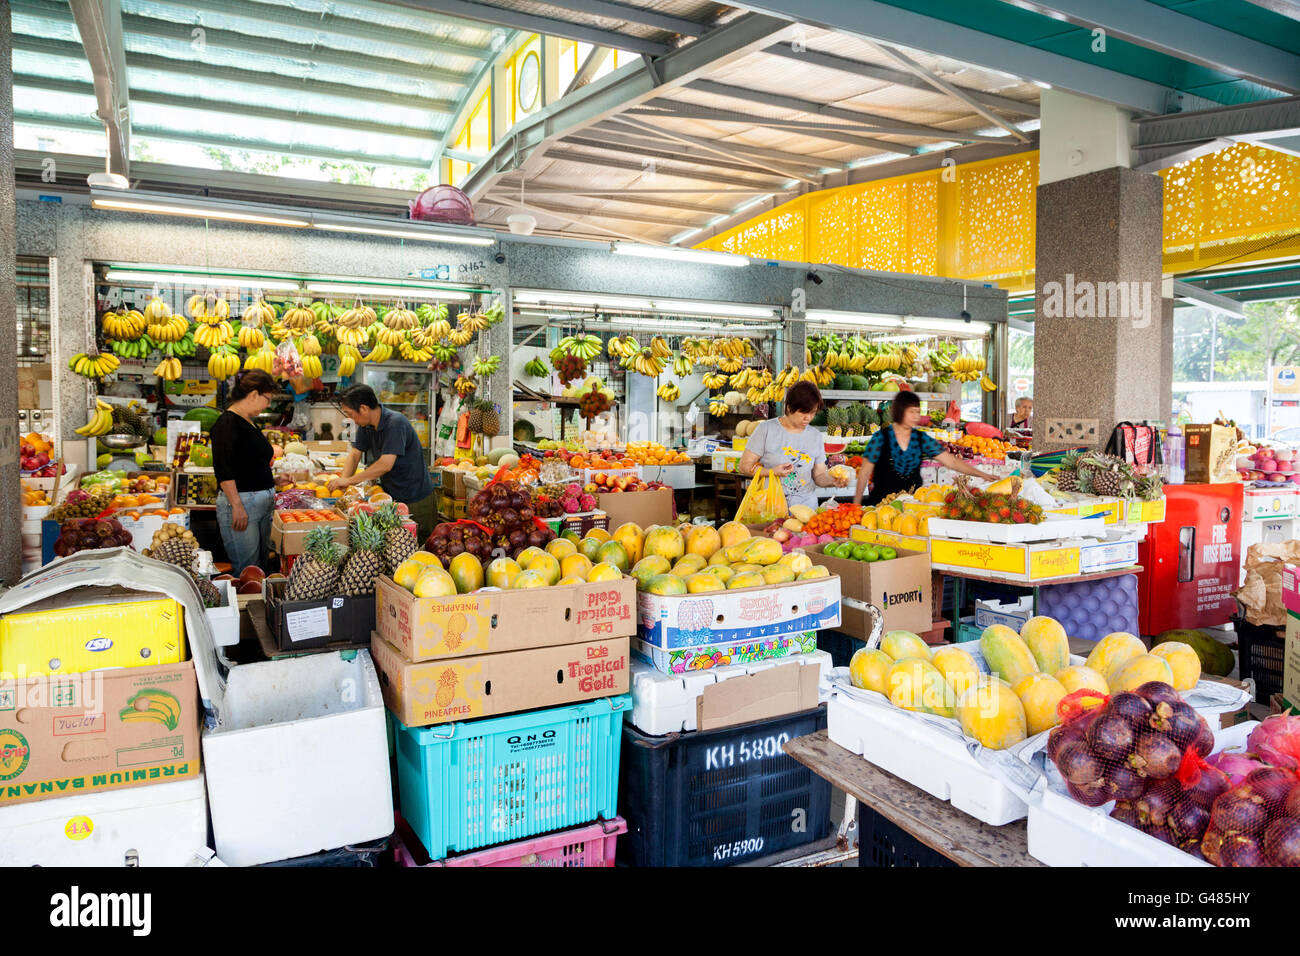 Singapore, Singapore - December 11, 2014: Local residents shopping for fruits and vegetables at a local wet market in Singapore. Stock Photo